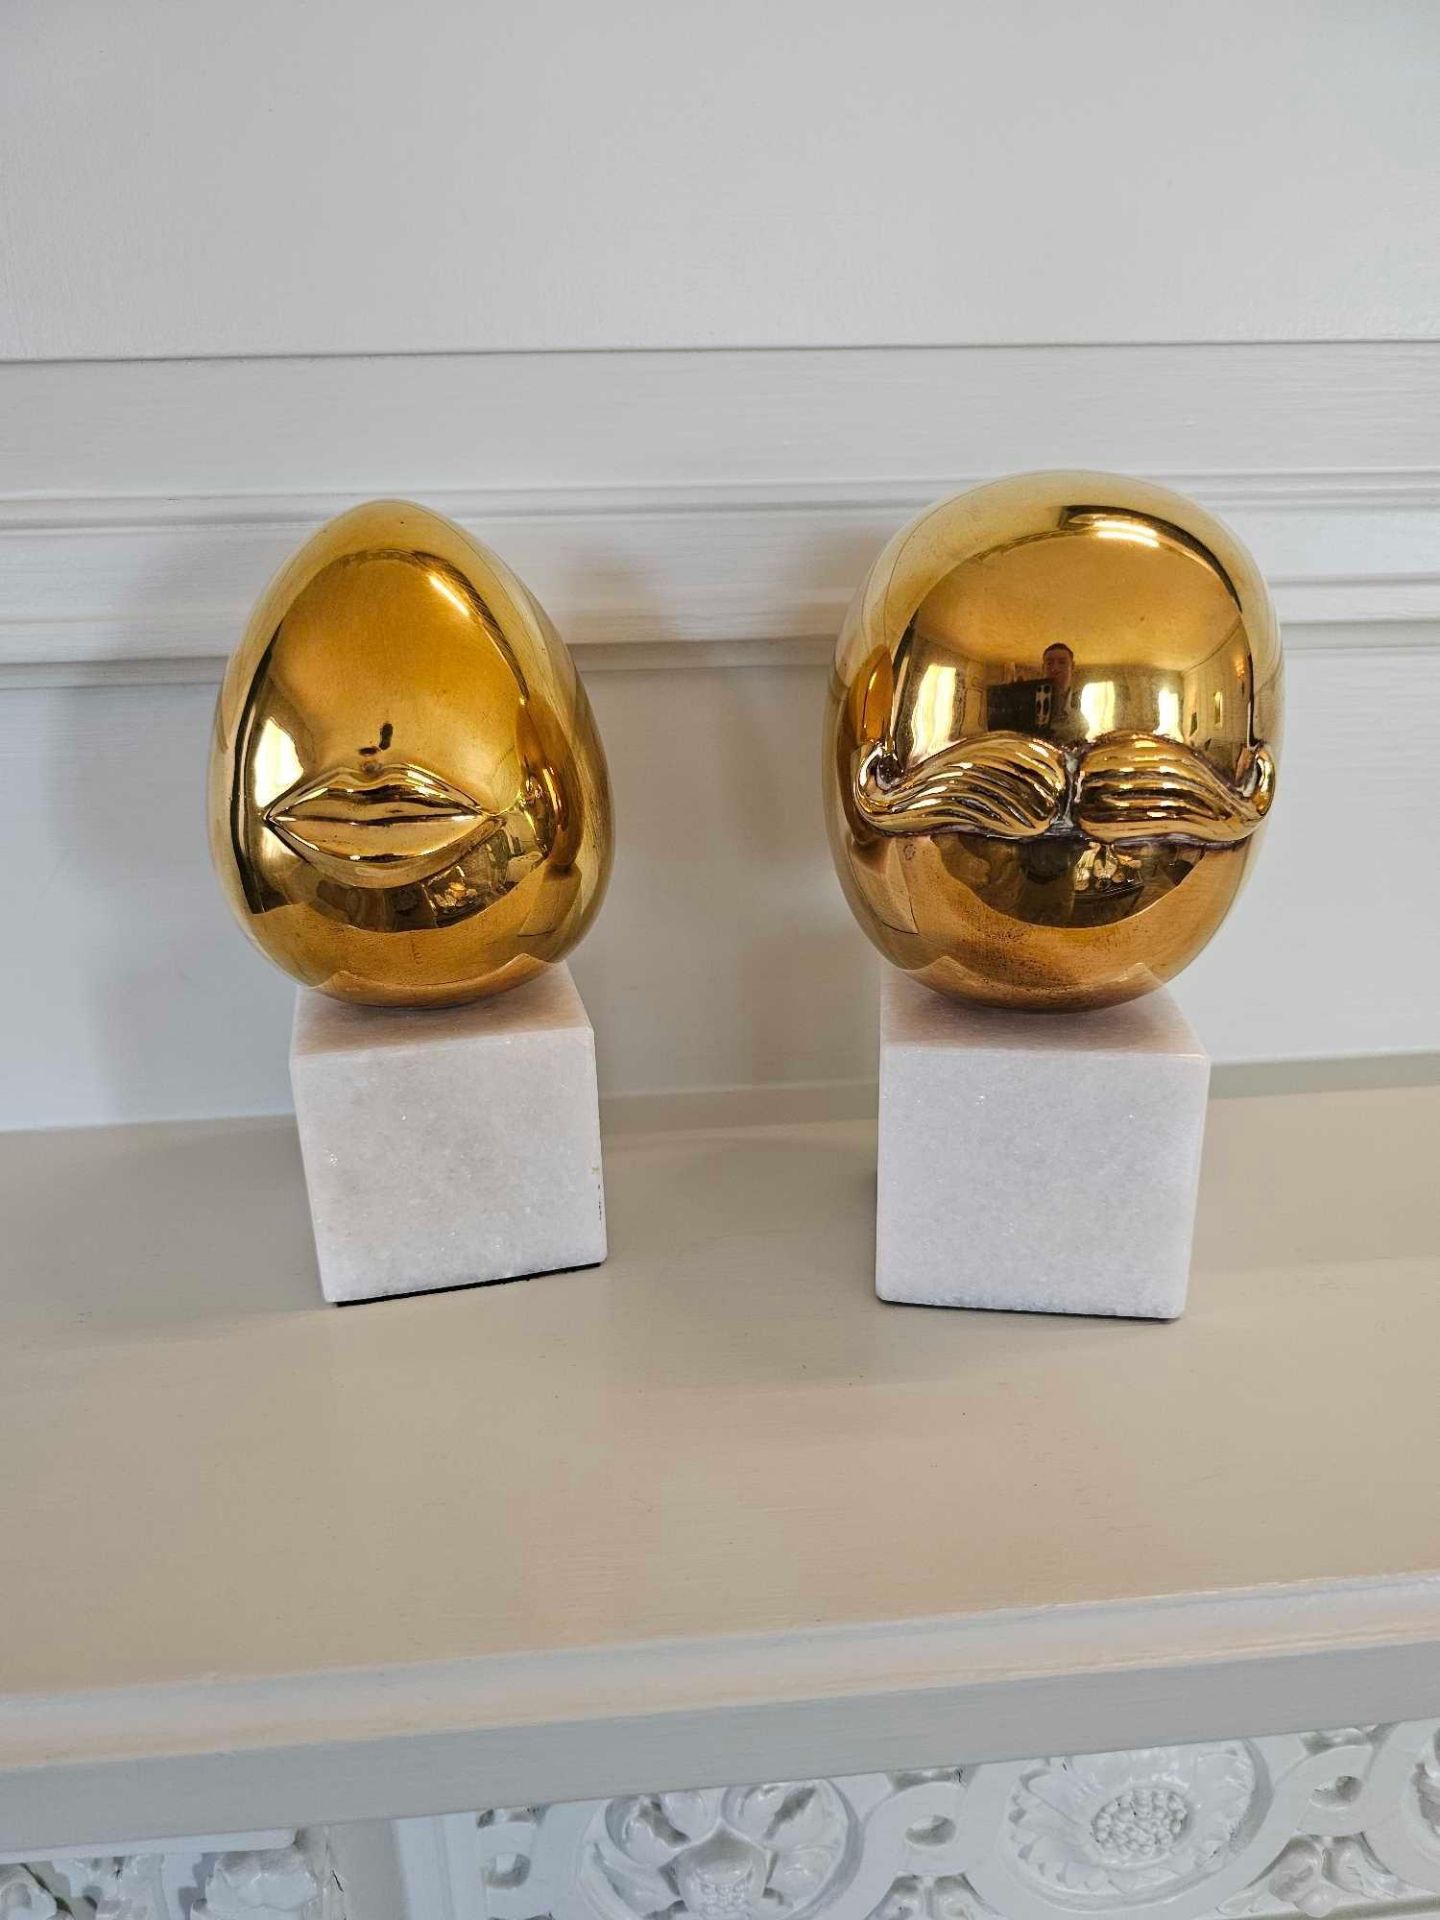 Jonathan Adler Brass Misia Sculpture Hand Sculpted In The Designers Soho Studio Then Sand Cast In